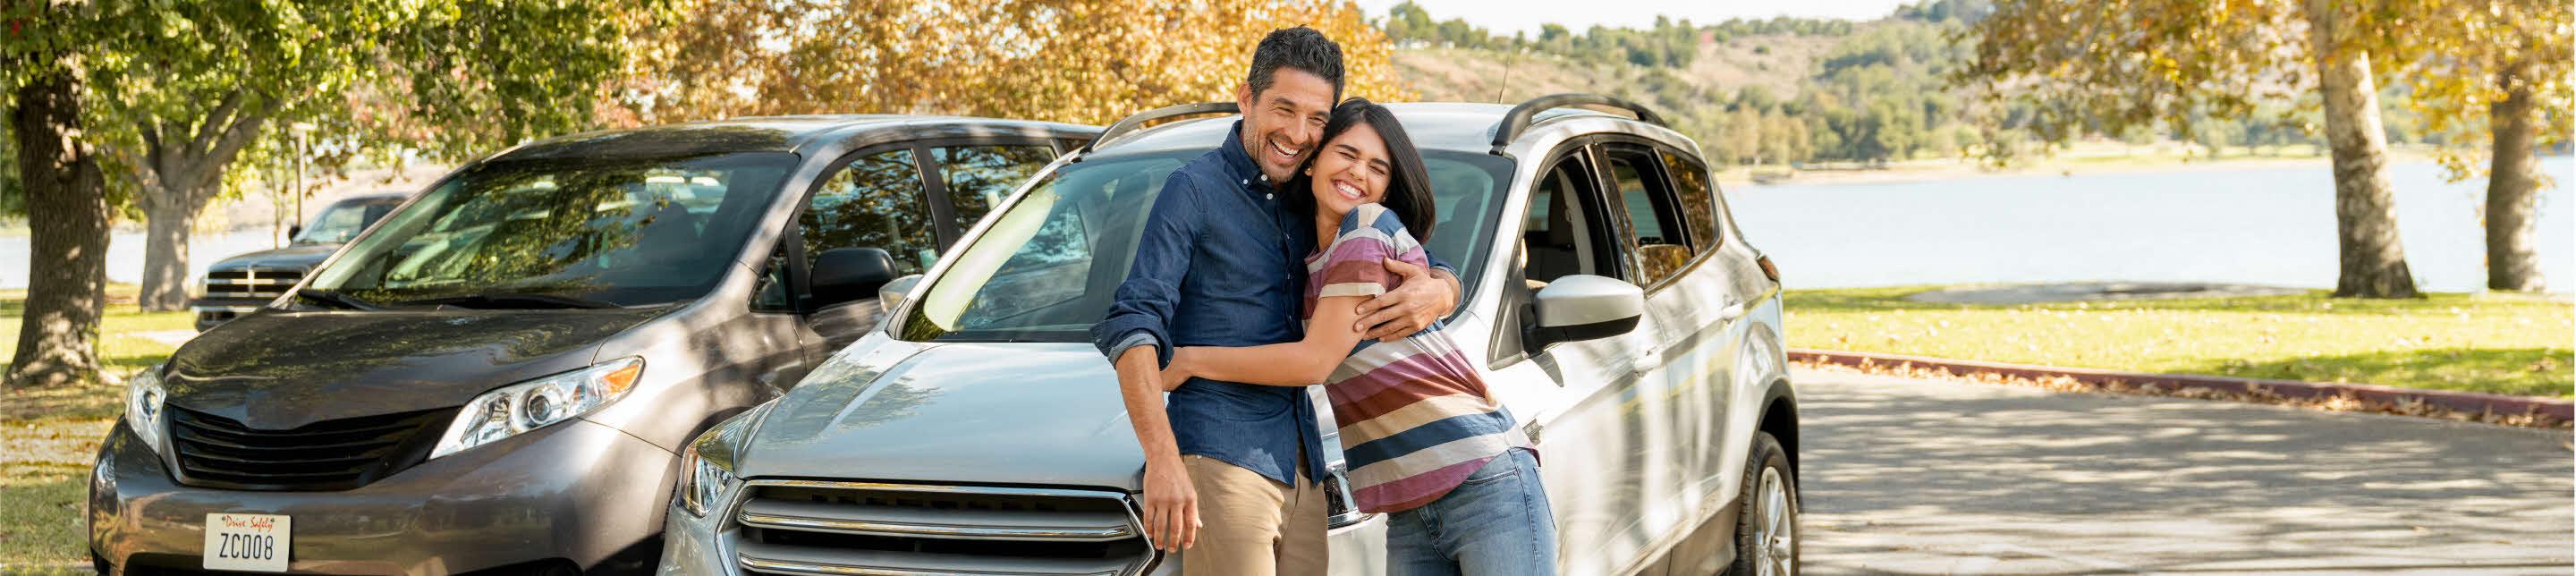 Two people embracing outside in front of a car